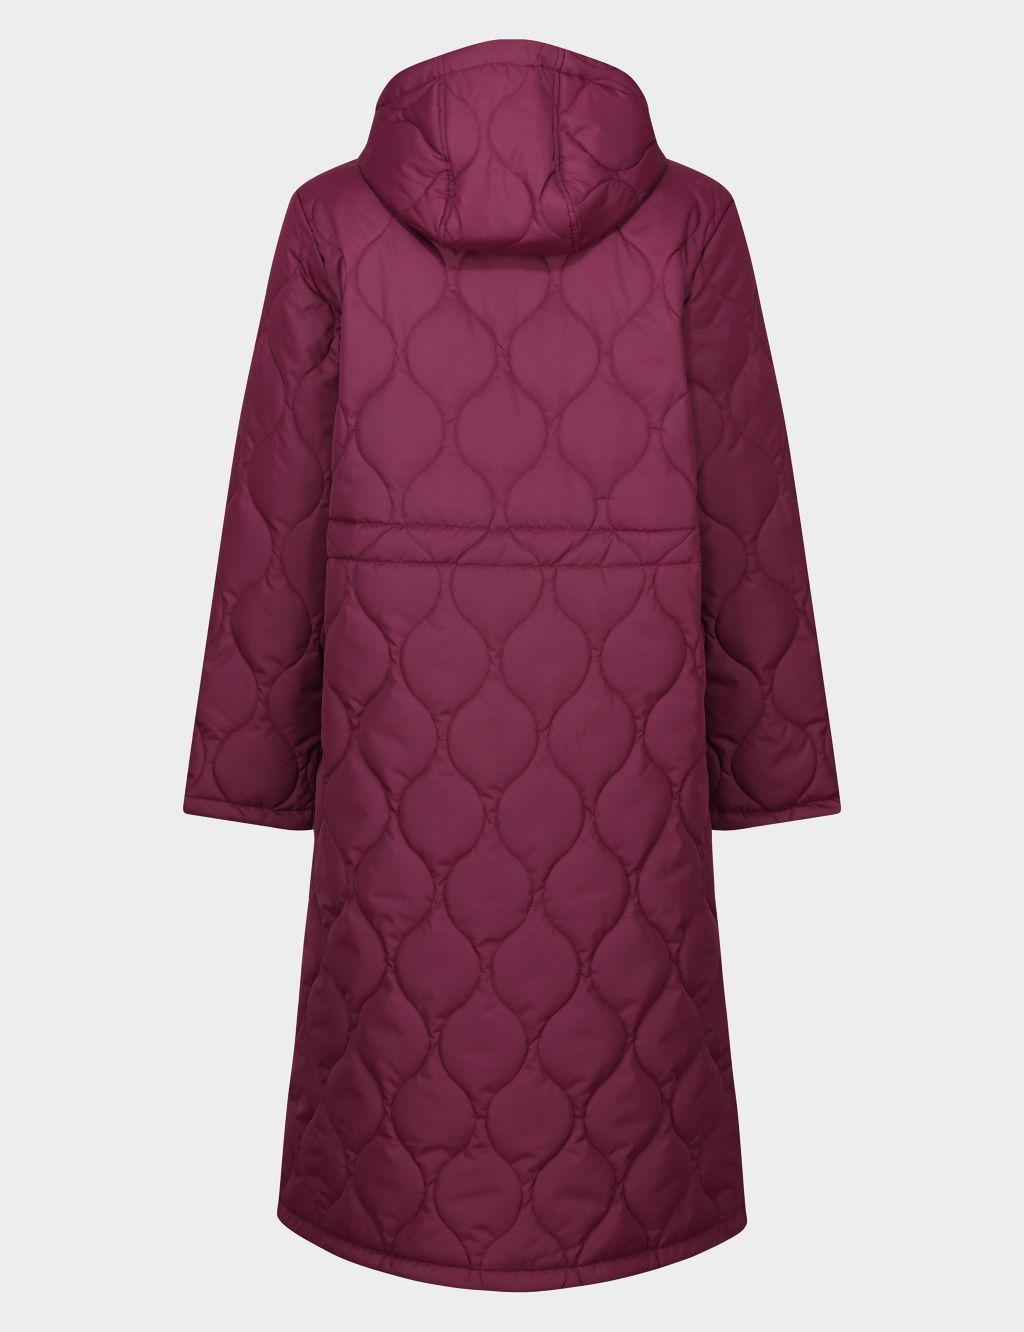 Orla Kiely Quilted Water-Repellent Longline Coat image 6